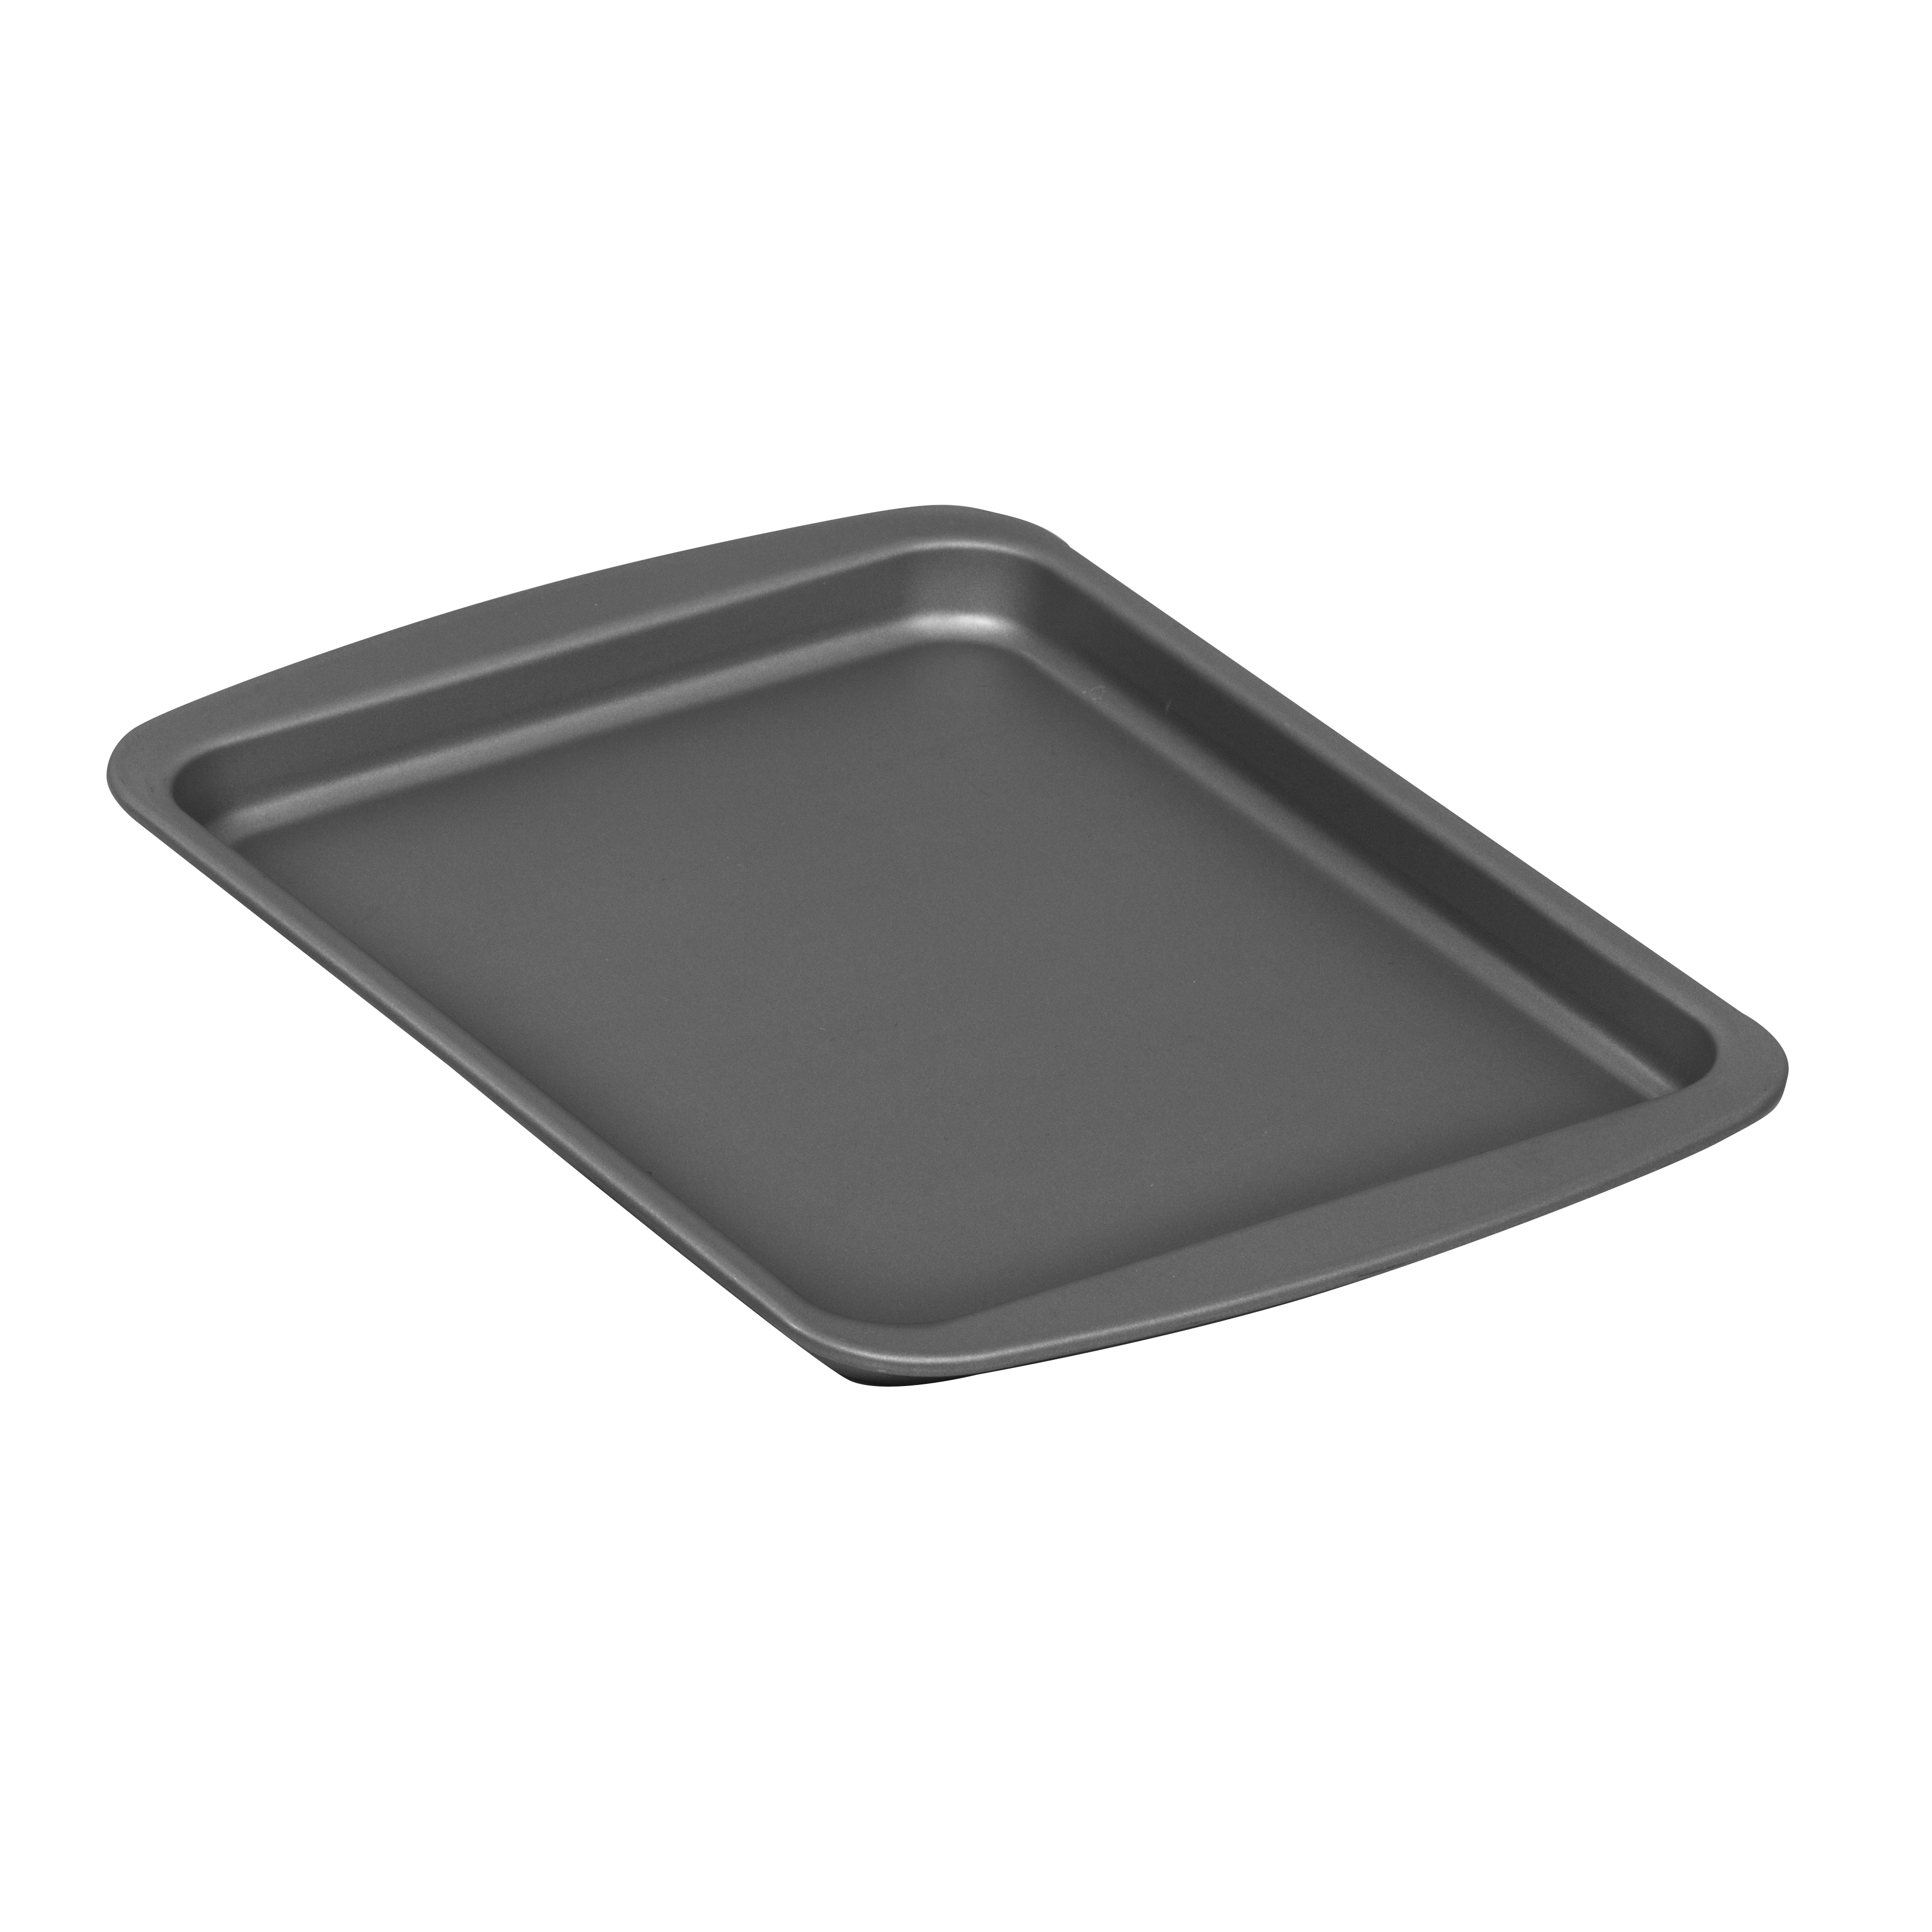 Mainstays Nonstick Mini Cookie Sheet,  8.5" x 6.5", Toaster Oven Pan, Gray - image 2 of 7